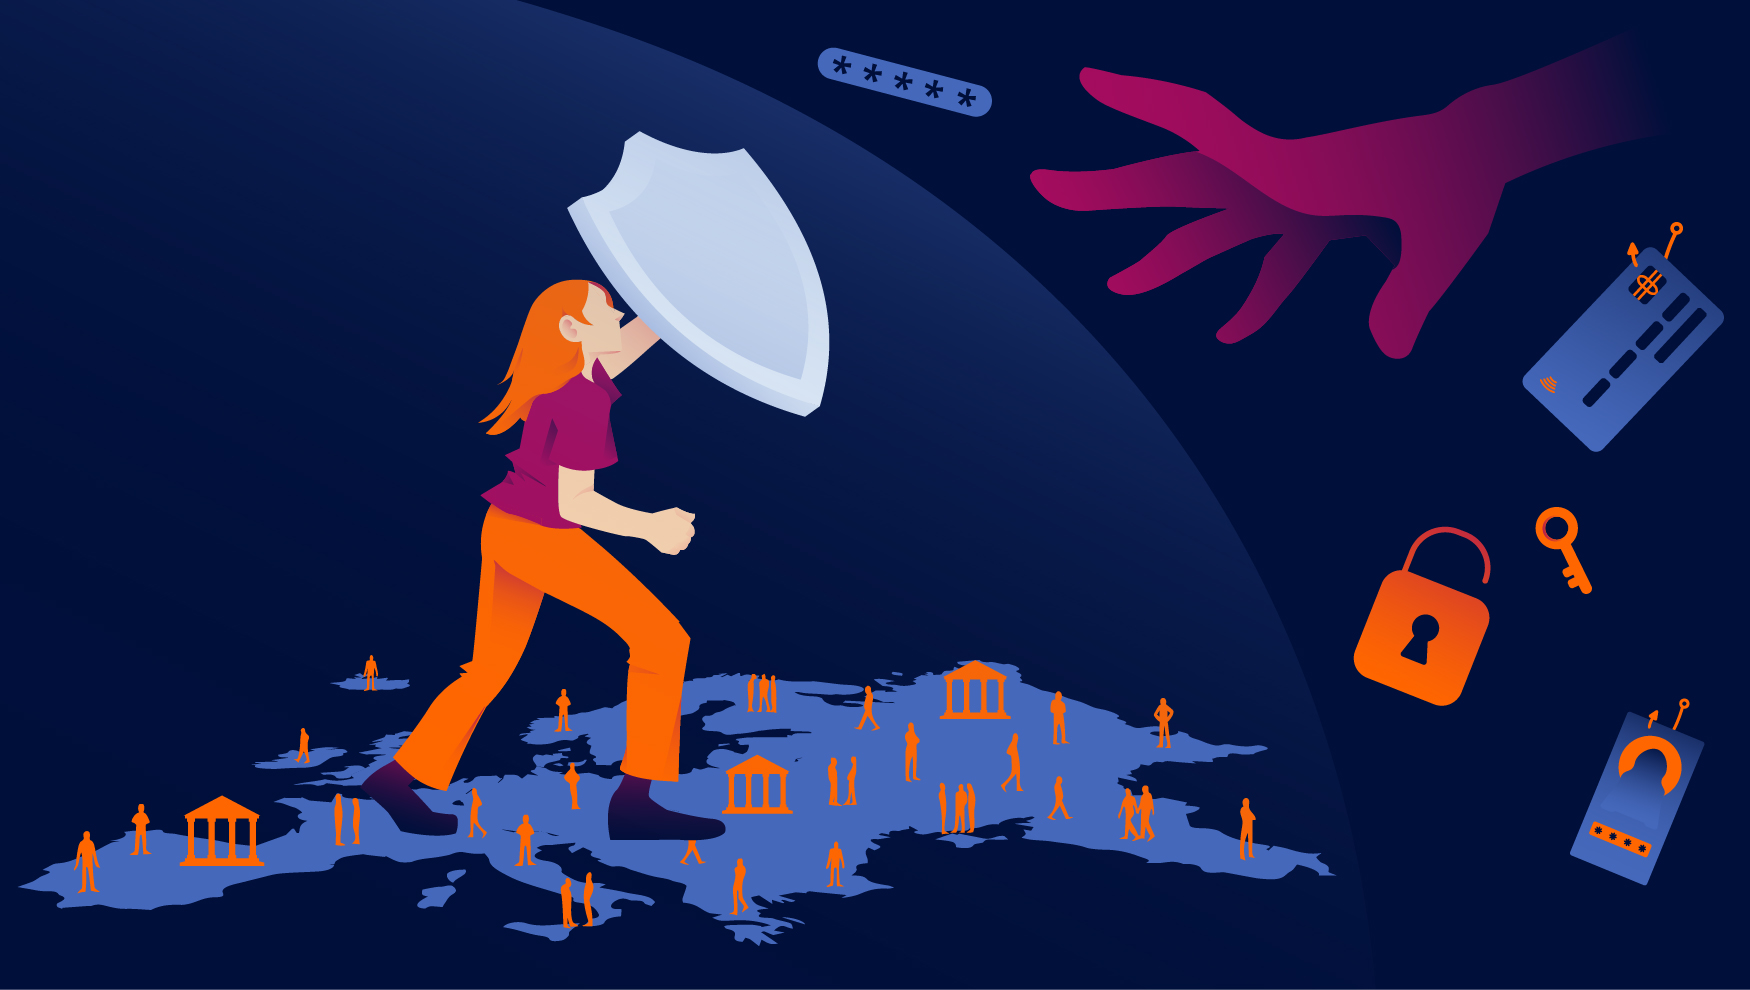 Illustration of woman holding shield over silhouette of European continent, defending banks from fraud and scam threats emerging from PSD3 and PSR updates